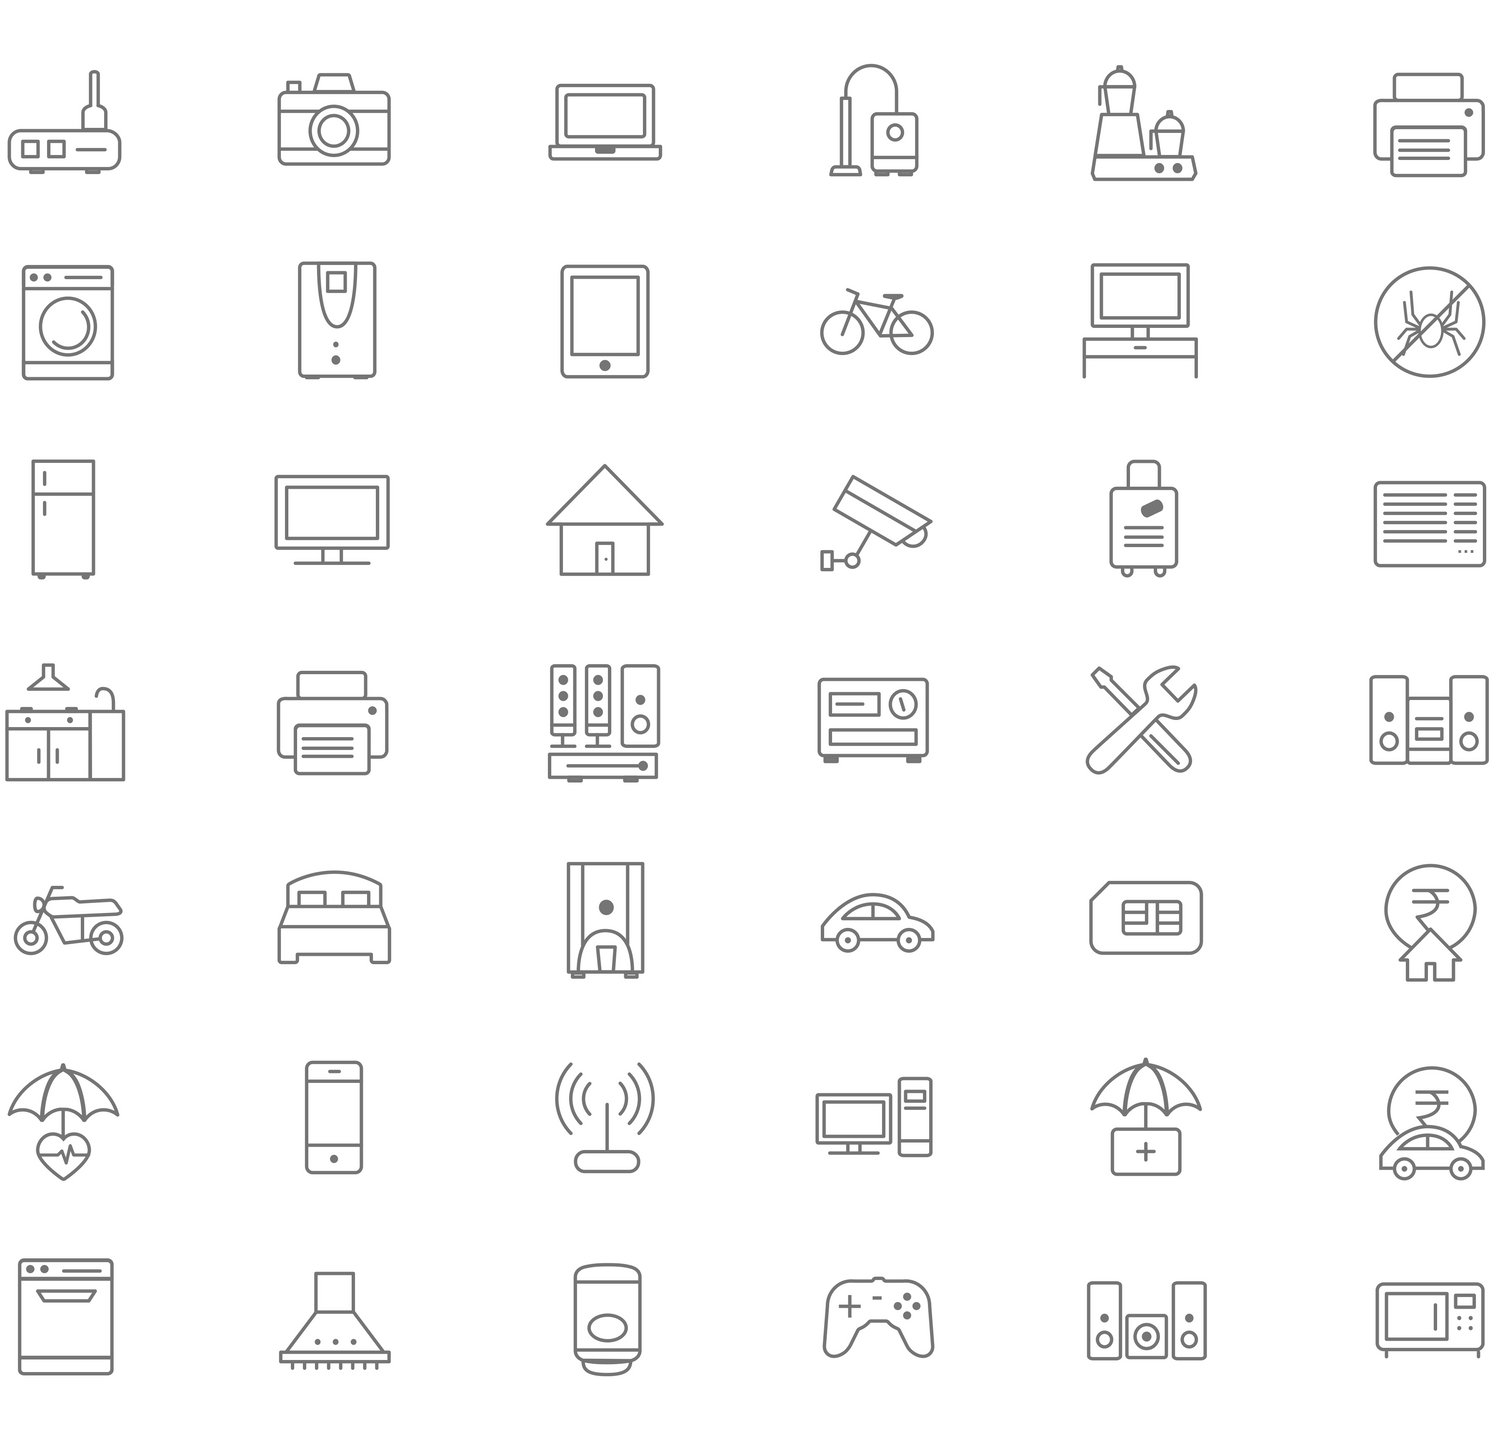 22product-icons-owntasticapp@3x.png